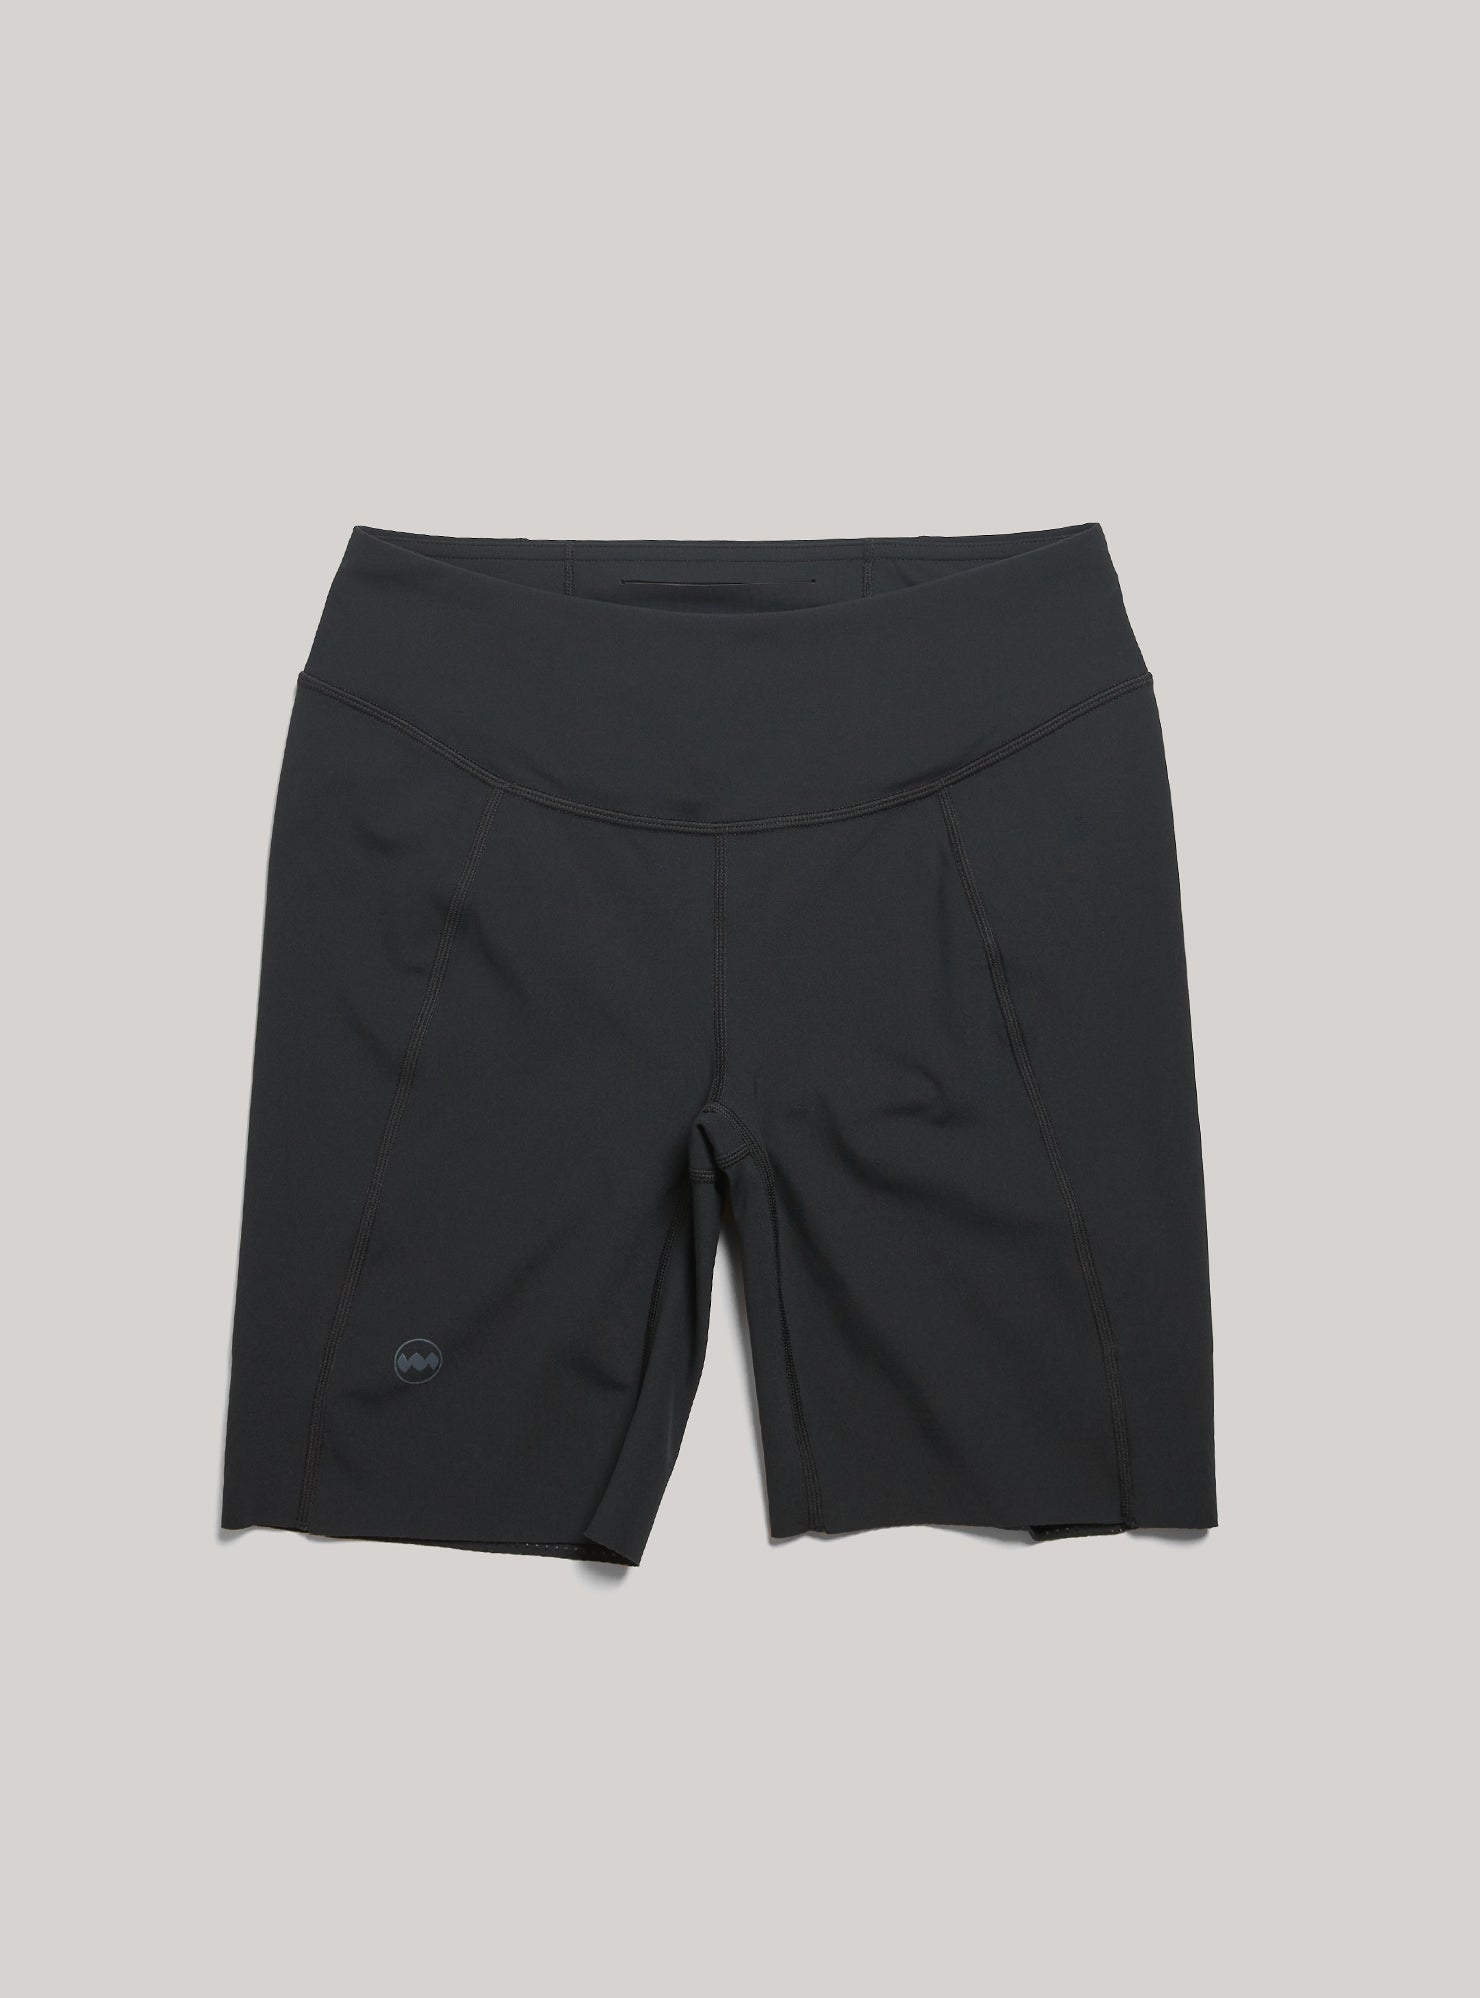 W's 7" Pace Short